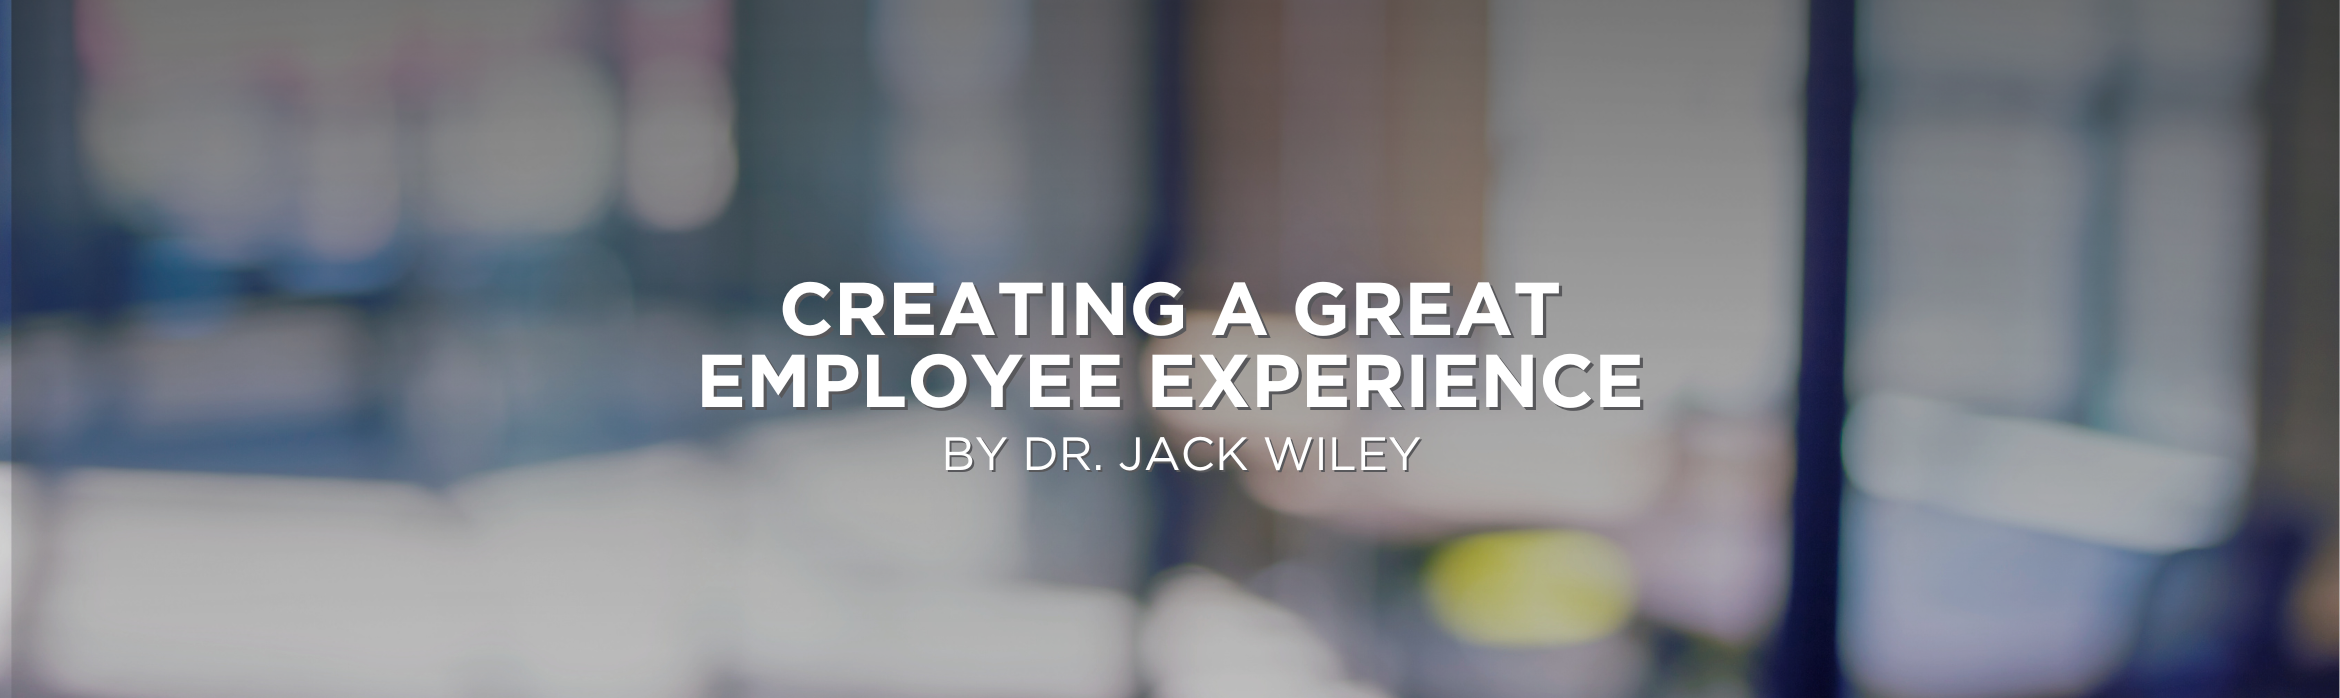 Creating a Great Employee Experience